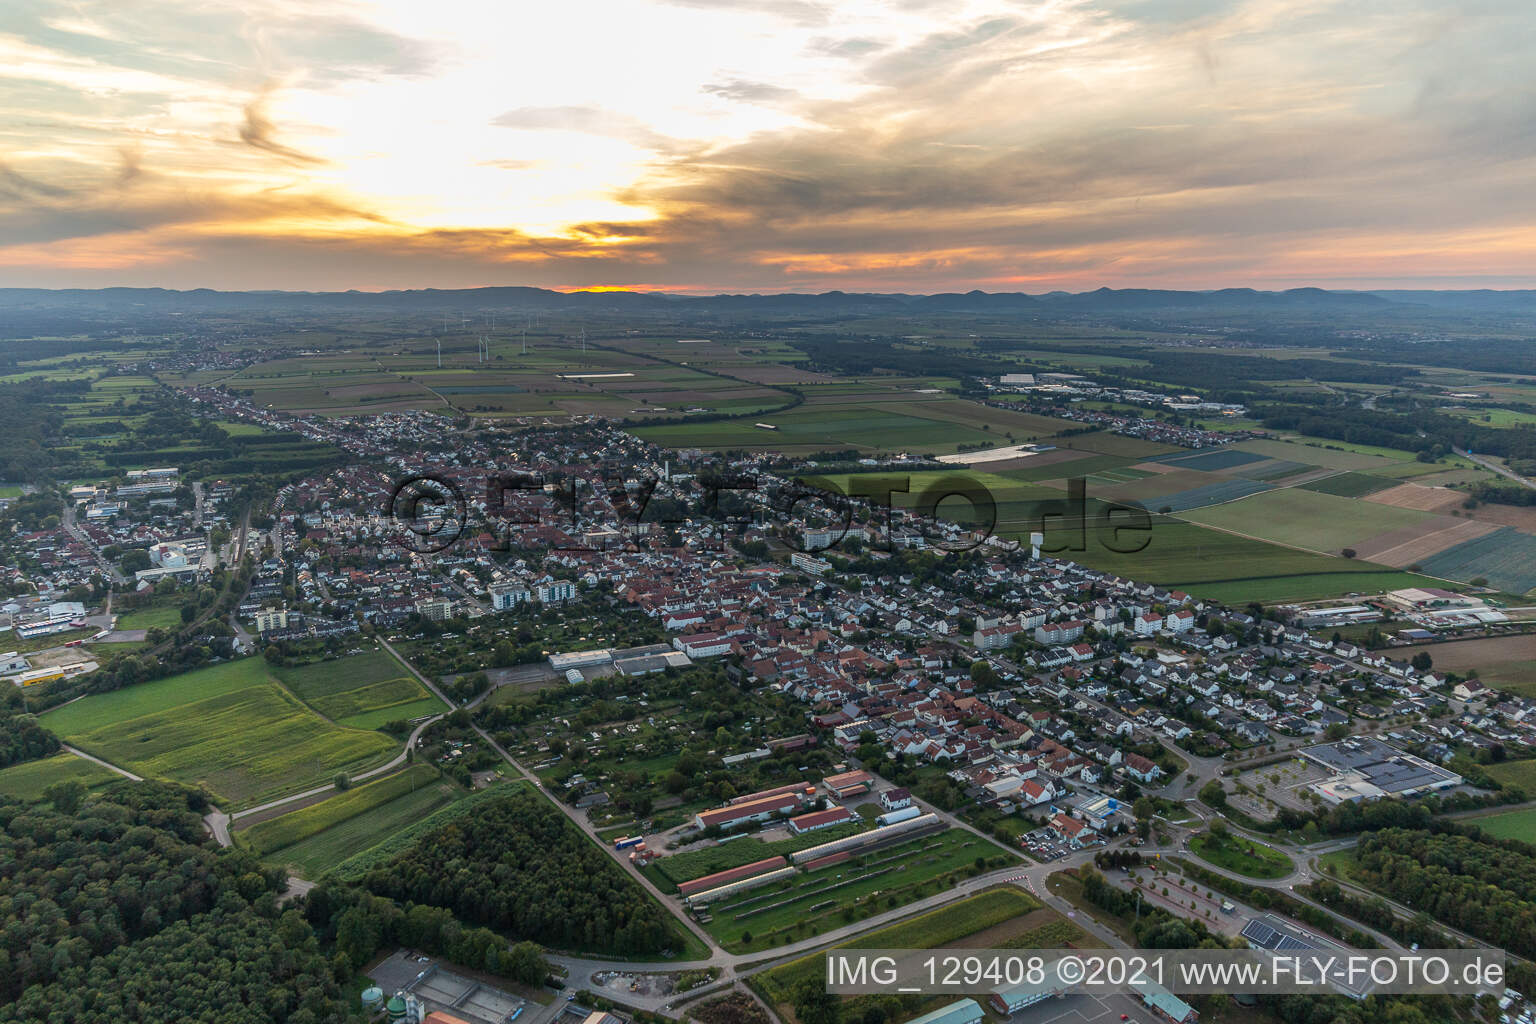 Drone recording of Kandel in the state Rhineland-Palatinate, Germany